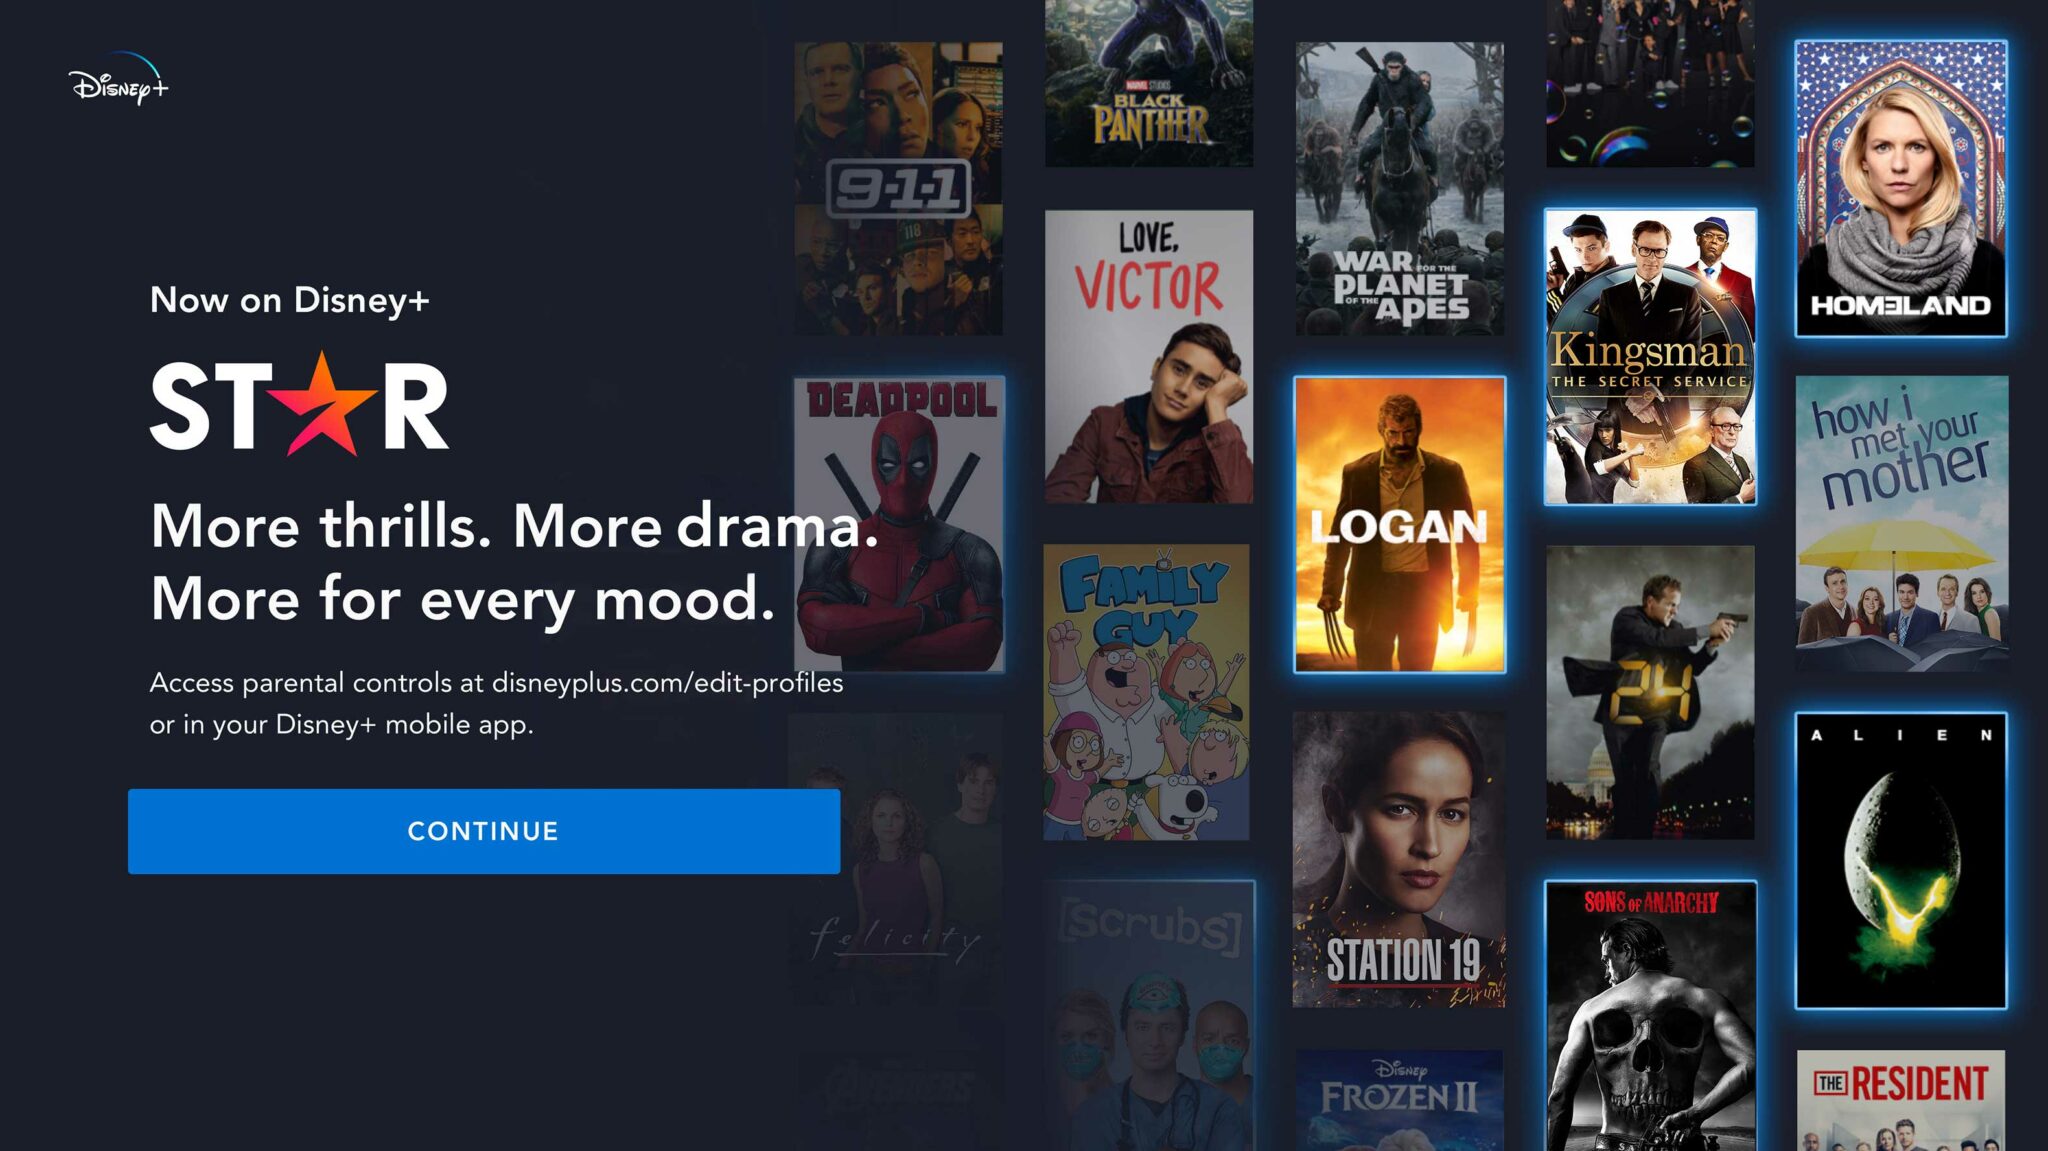 You can watch Hulu TV shows and movies on Disney+’s Star in Canada